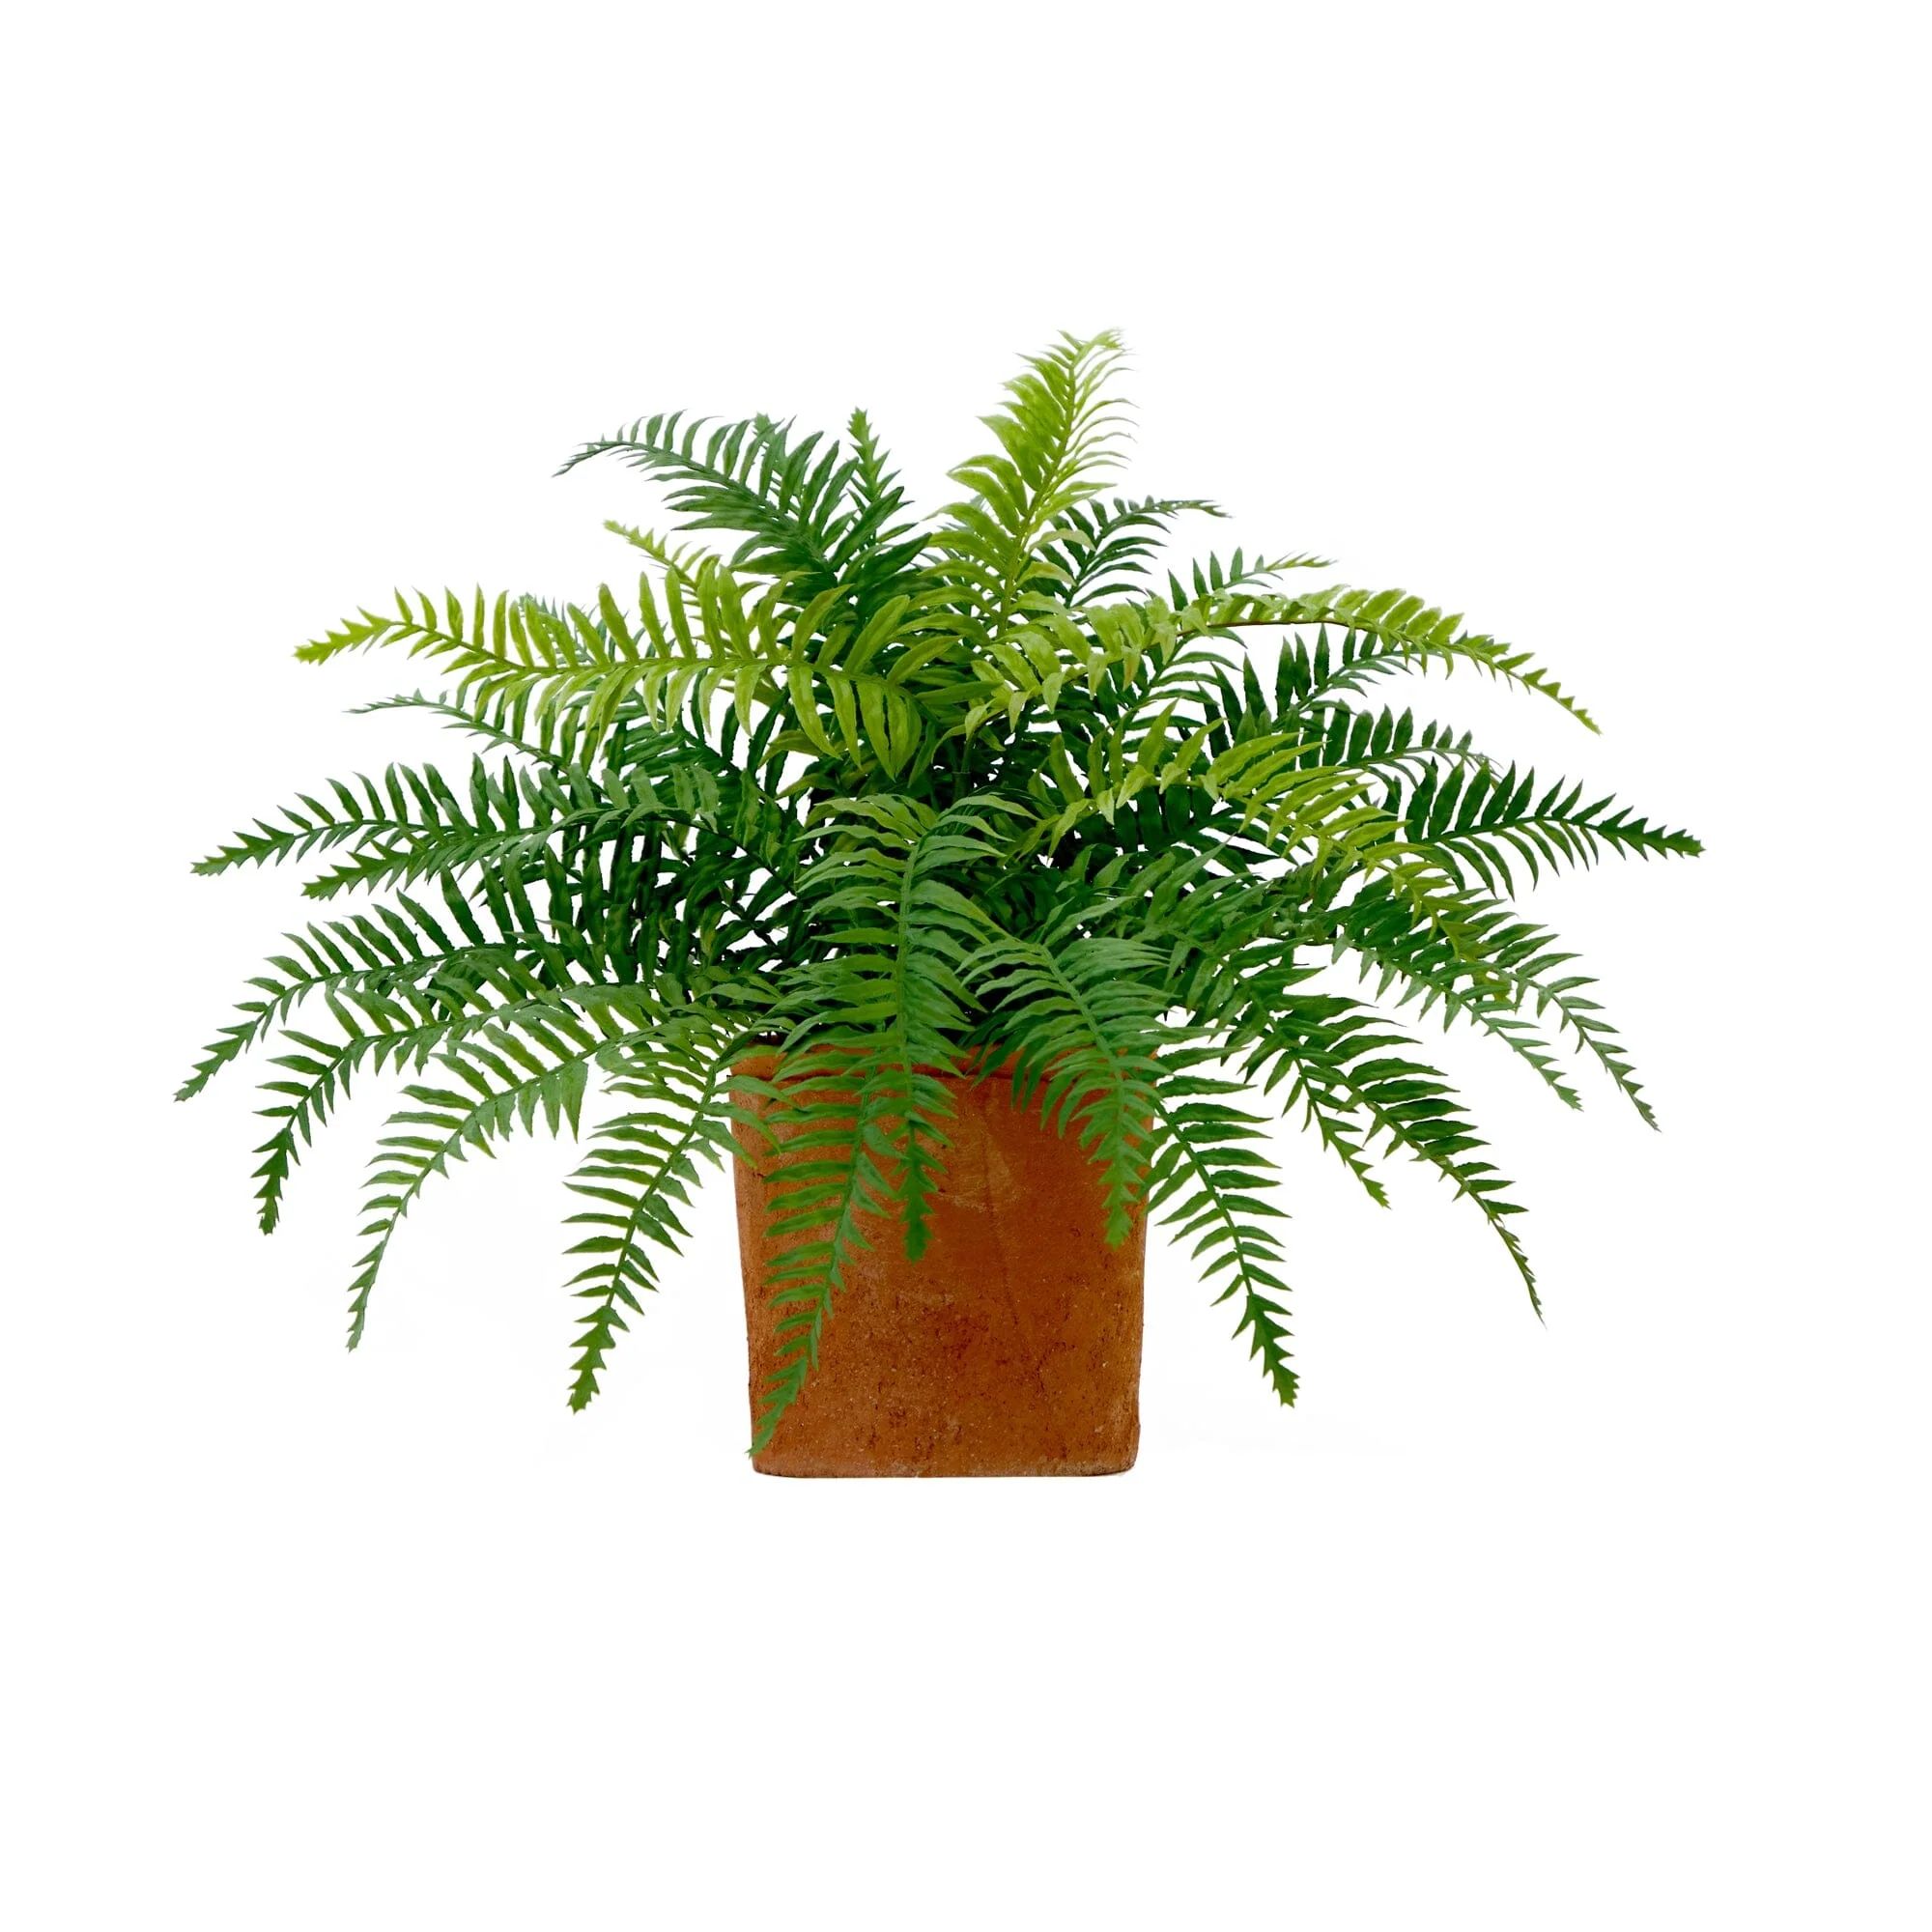 22” Artificial Fern Plant in Decorative Planter | Nearly Natural | Nearly Natural